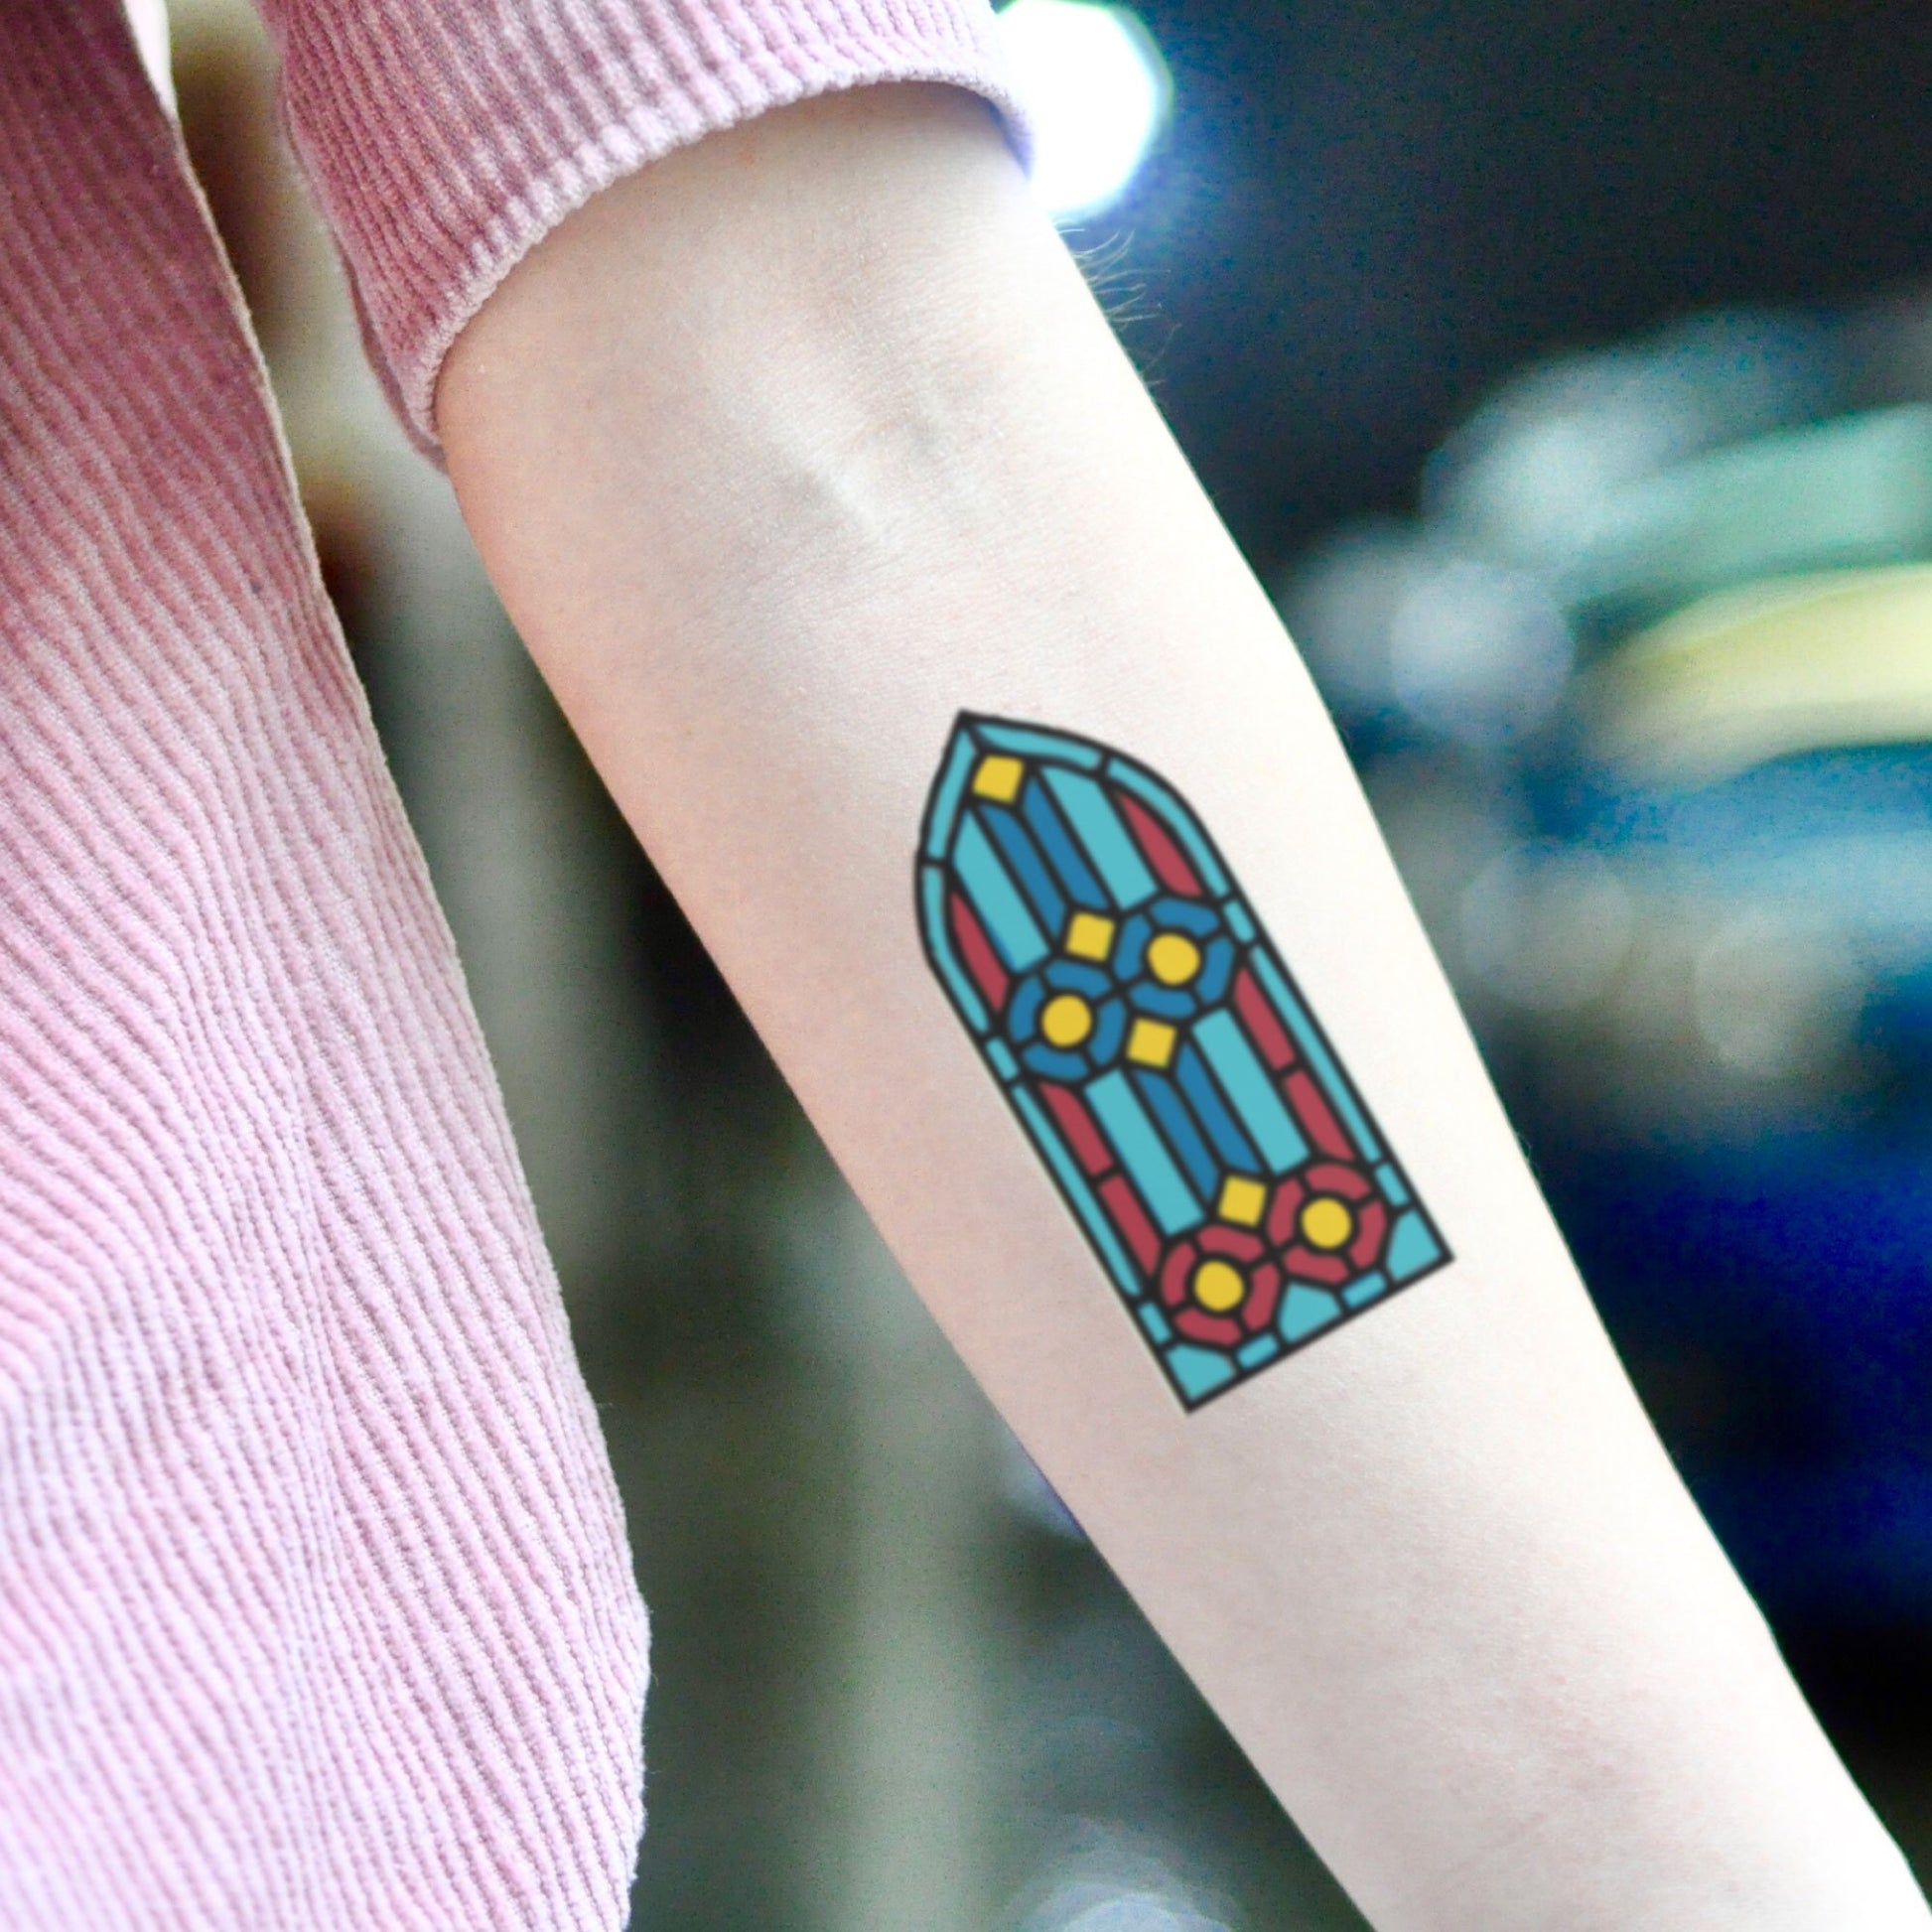 fake small stained glass window religious color temporary tattoo sticker design idea on inner arm